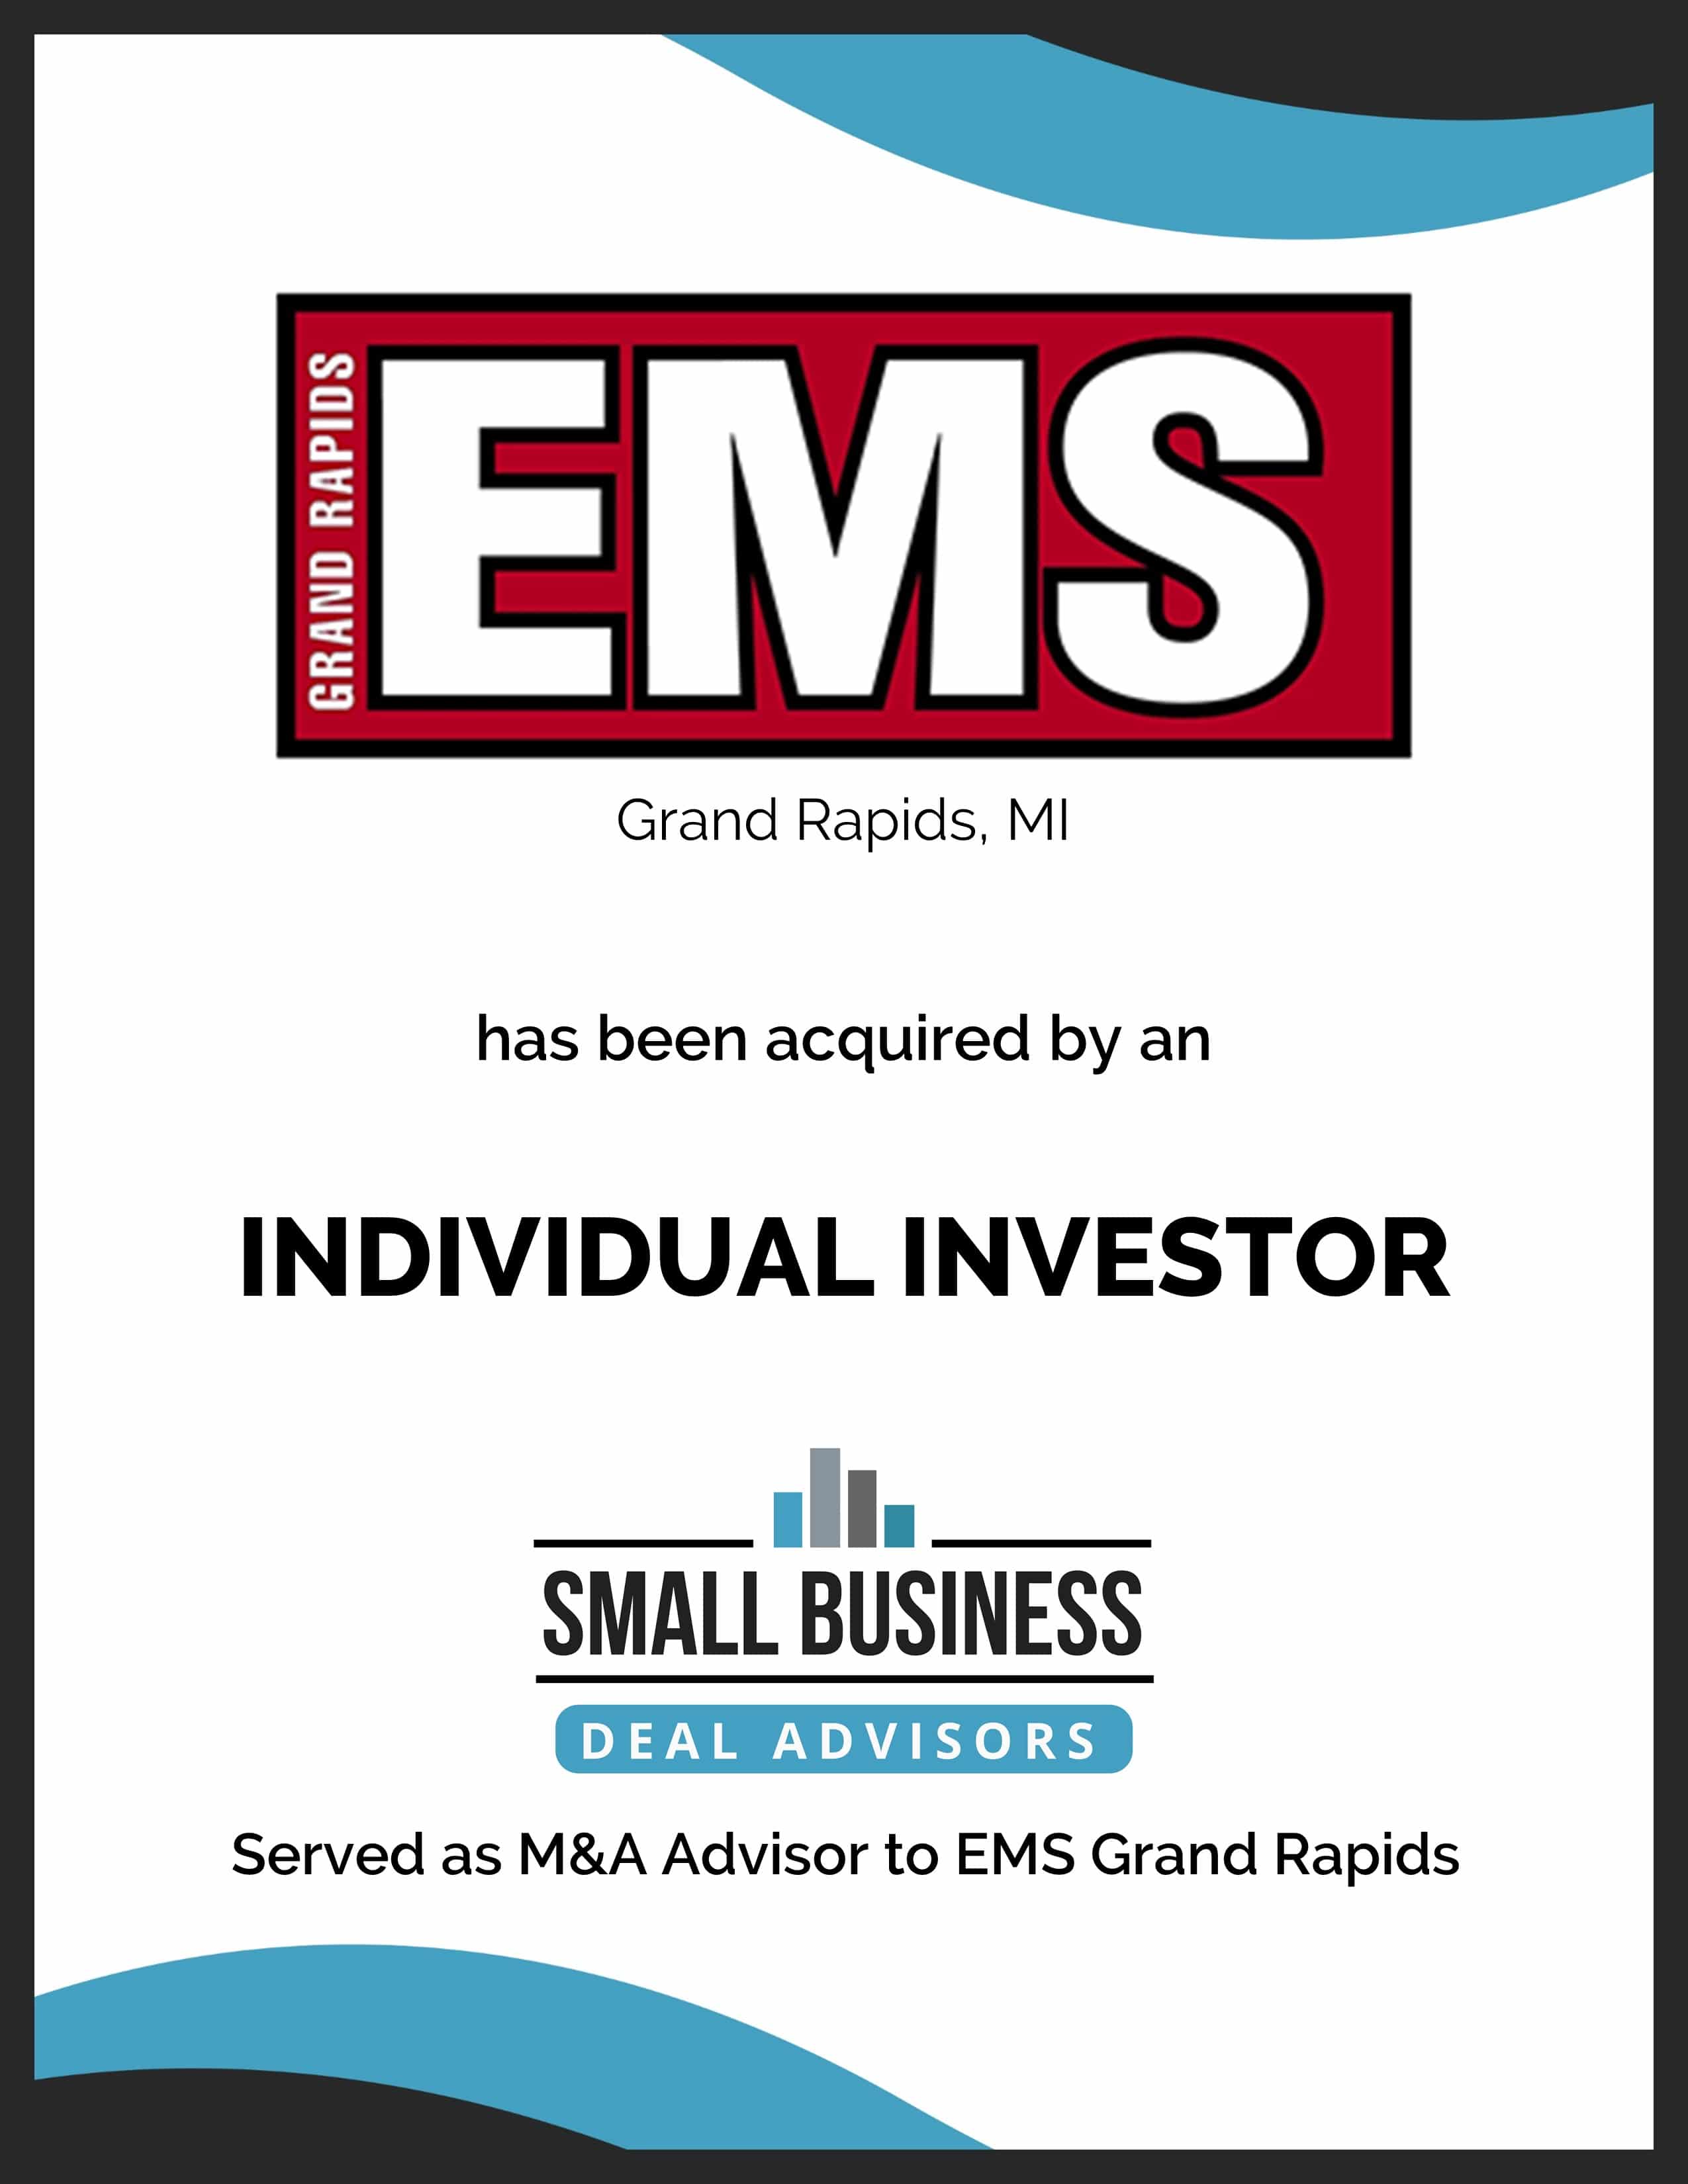 EMS Grand Rapids Acquired by an Individual Investor